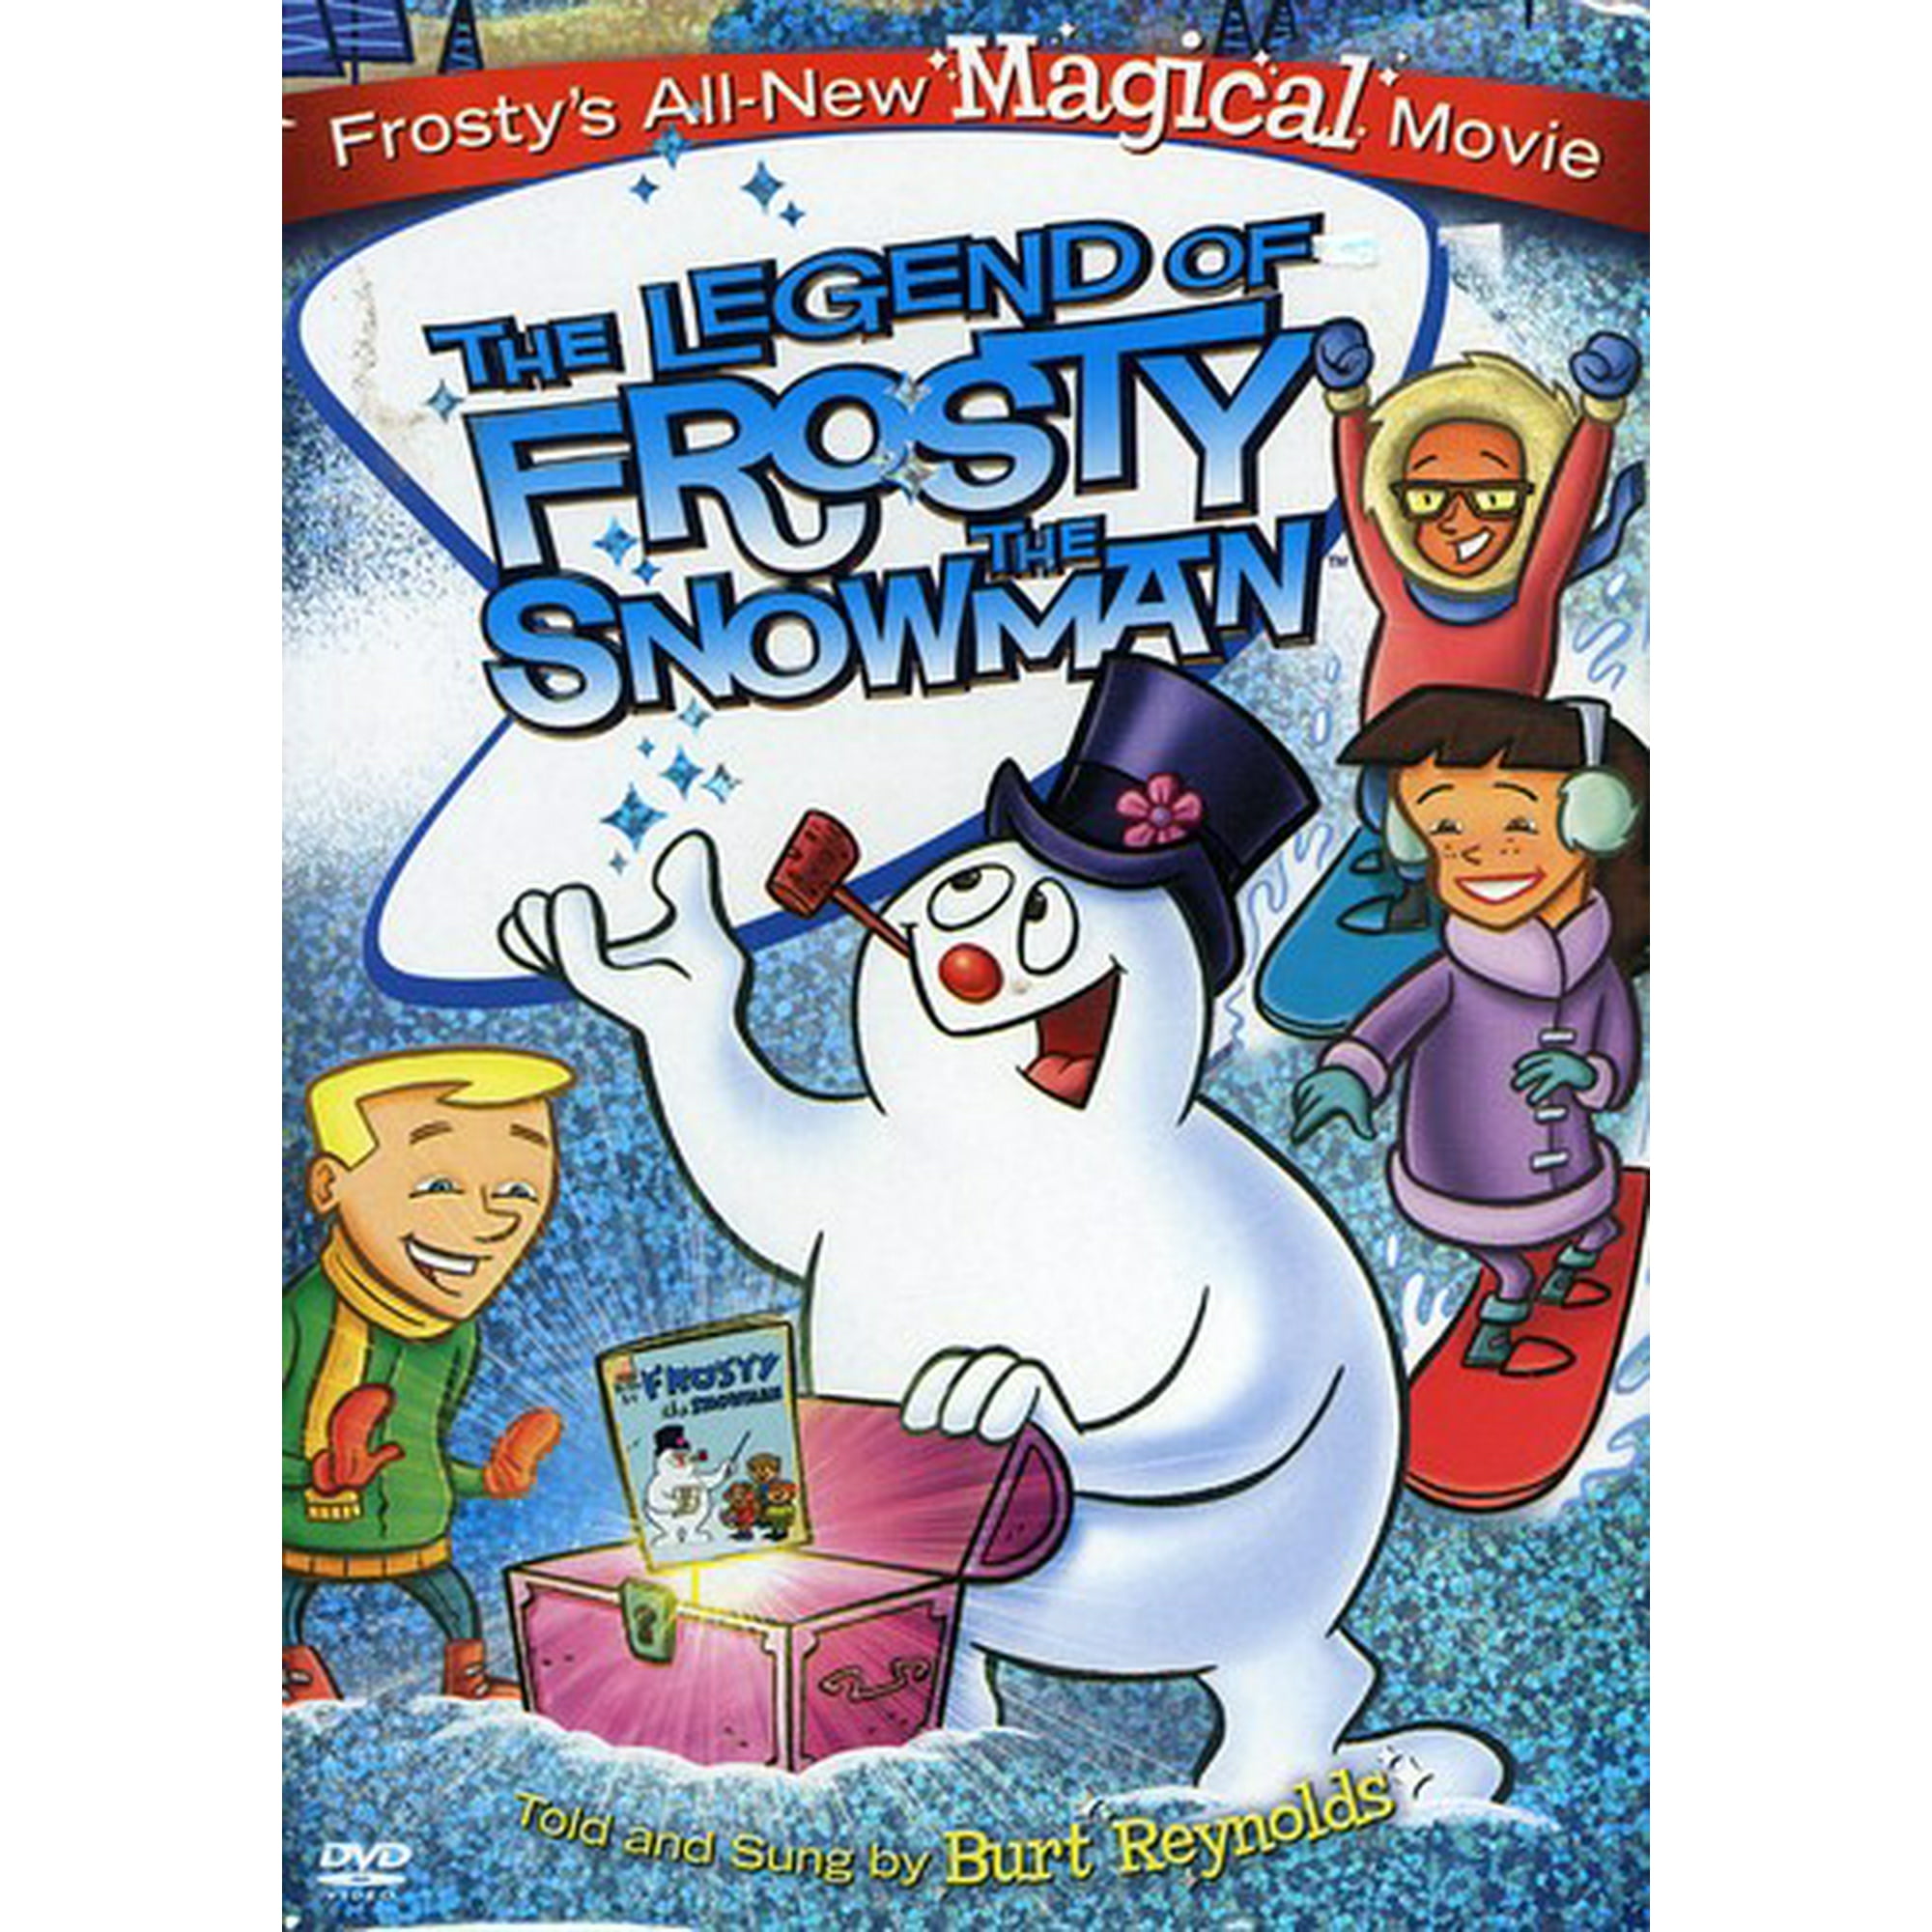 The Legend of Frosty the Snowman [DIGITAL VIDEO DISC]